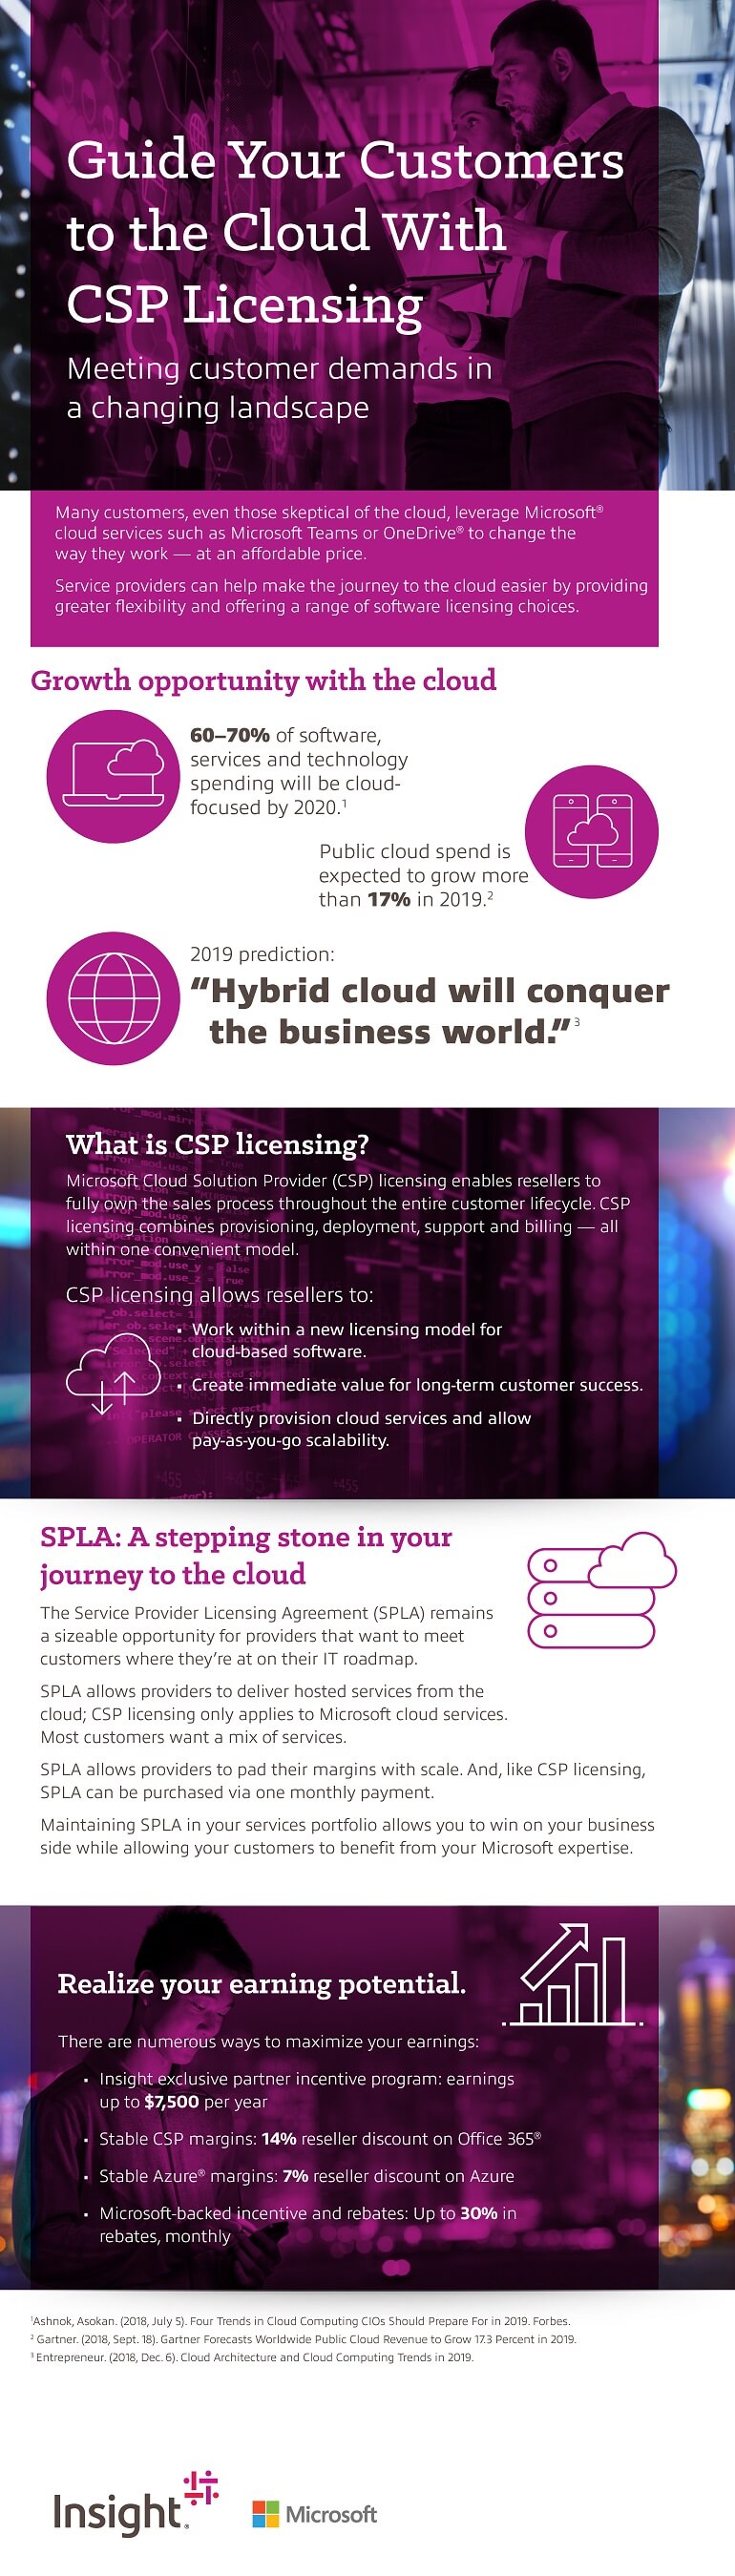 Infographic displaying the Migrate to the Cloud With CSP Licensing asset